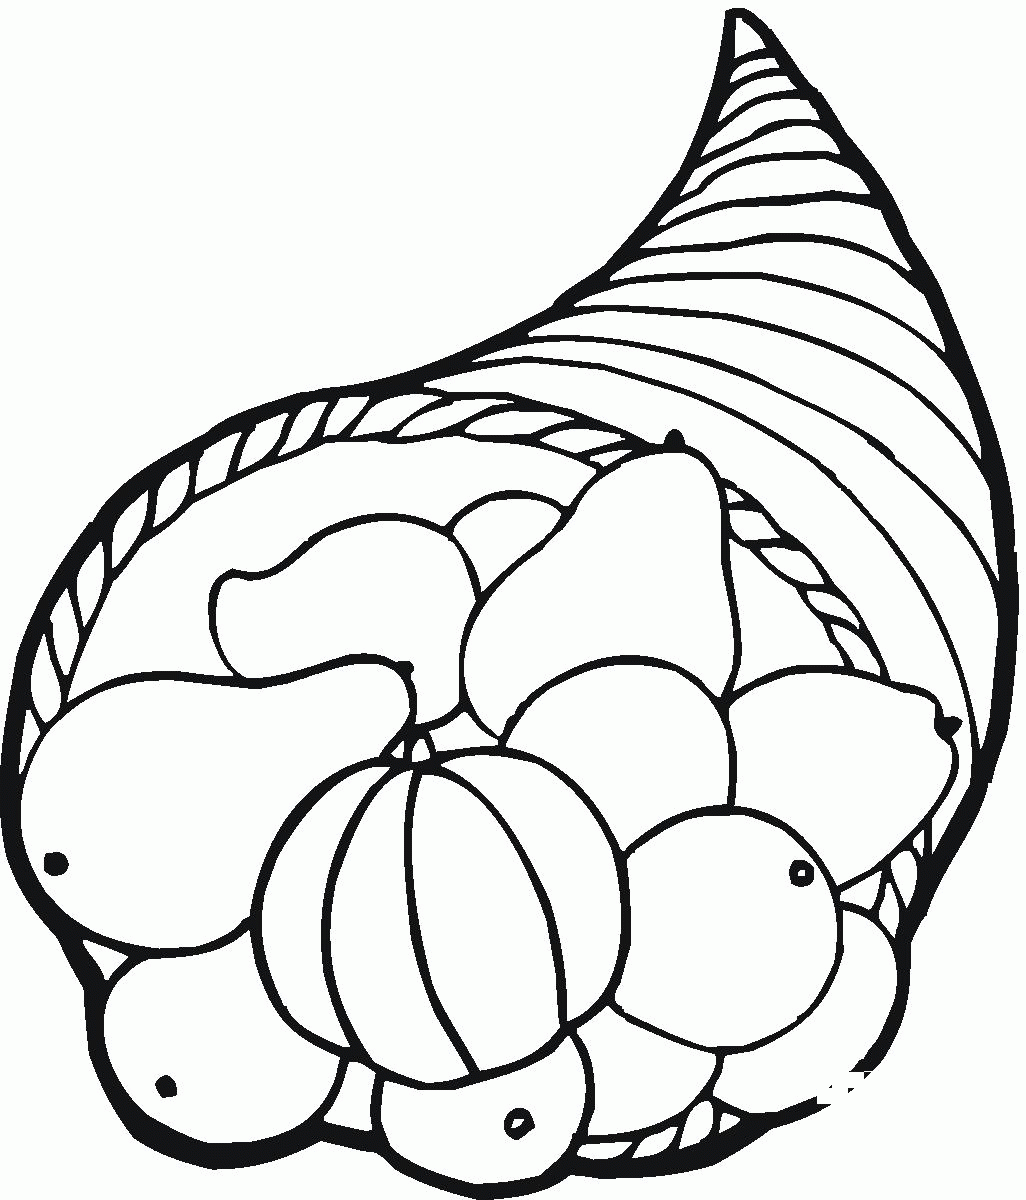 Thanksgiving Horn of Plenty coloring page - ColouringPages